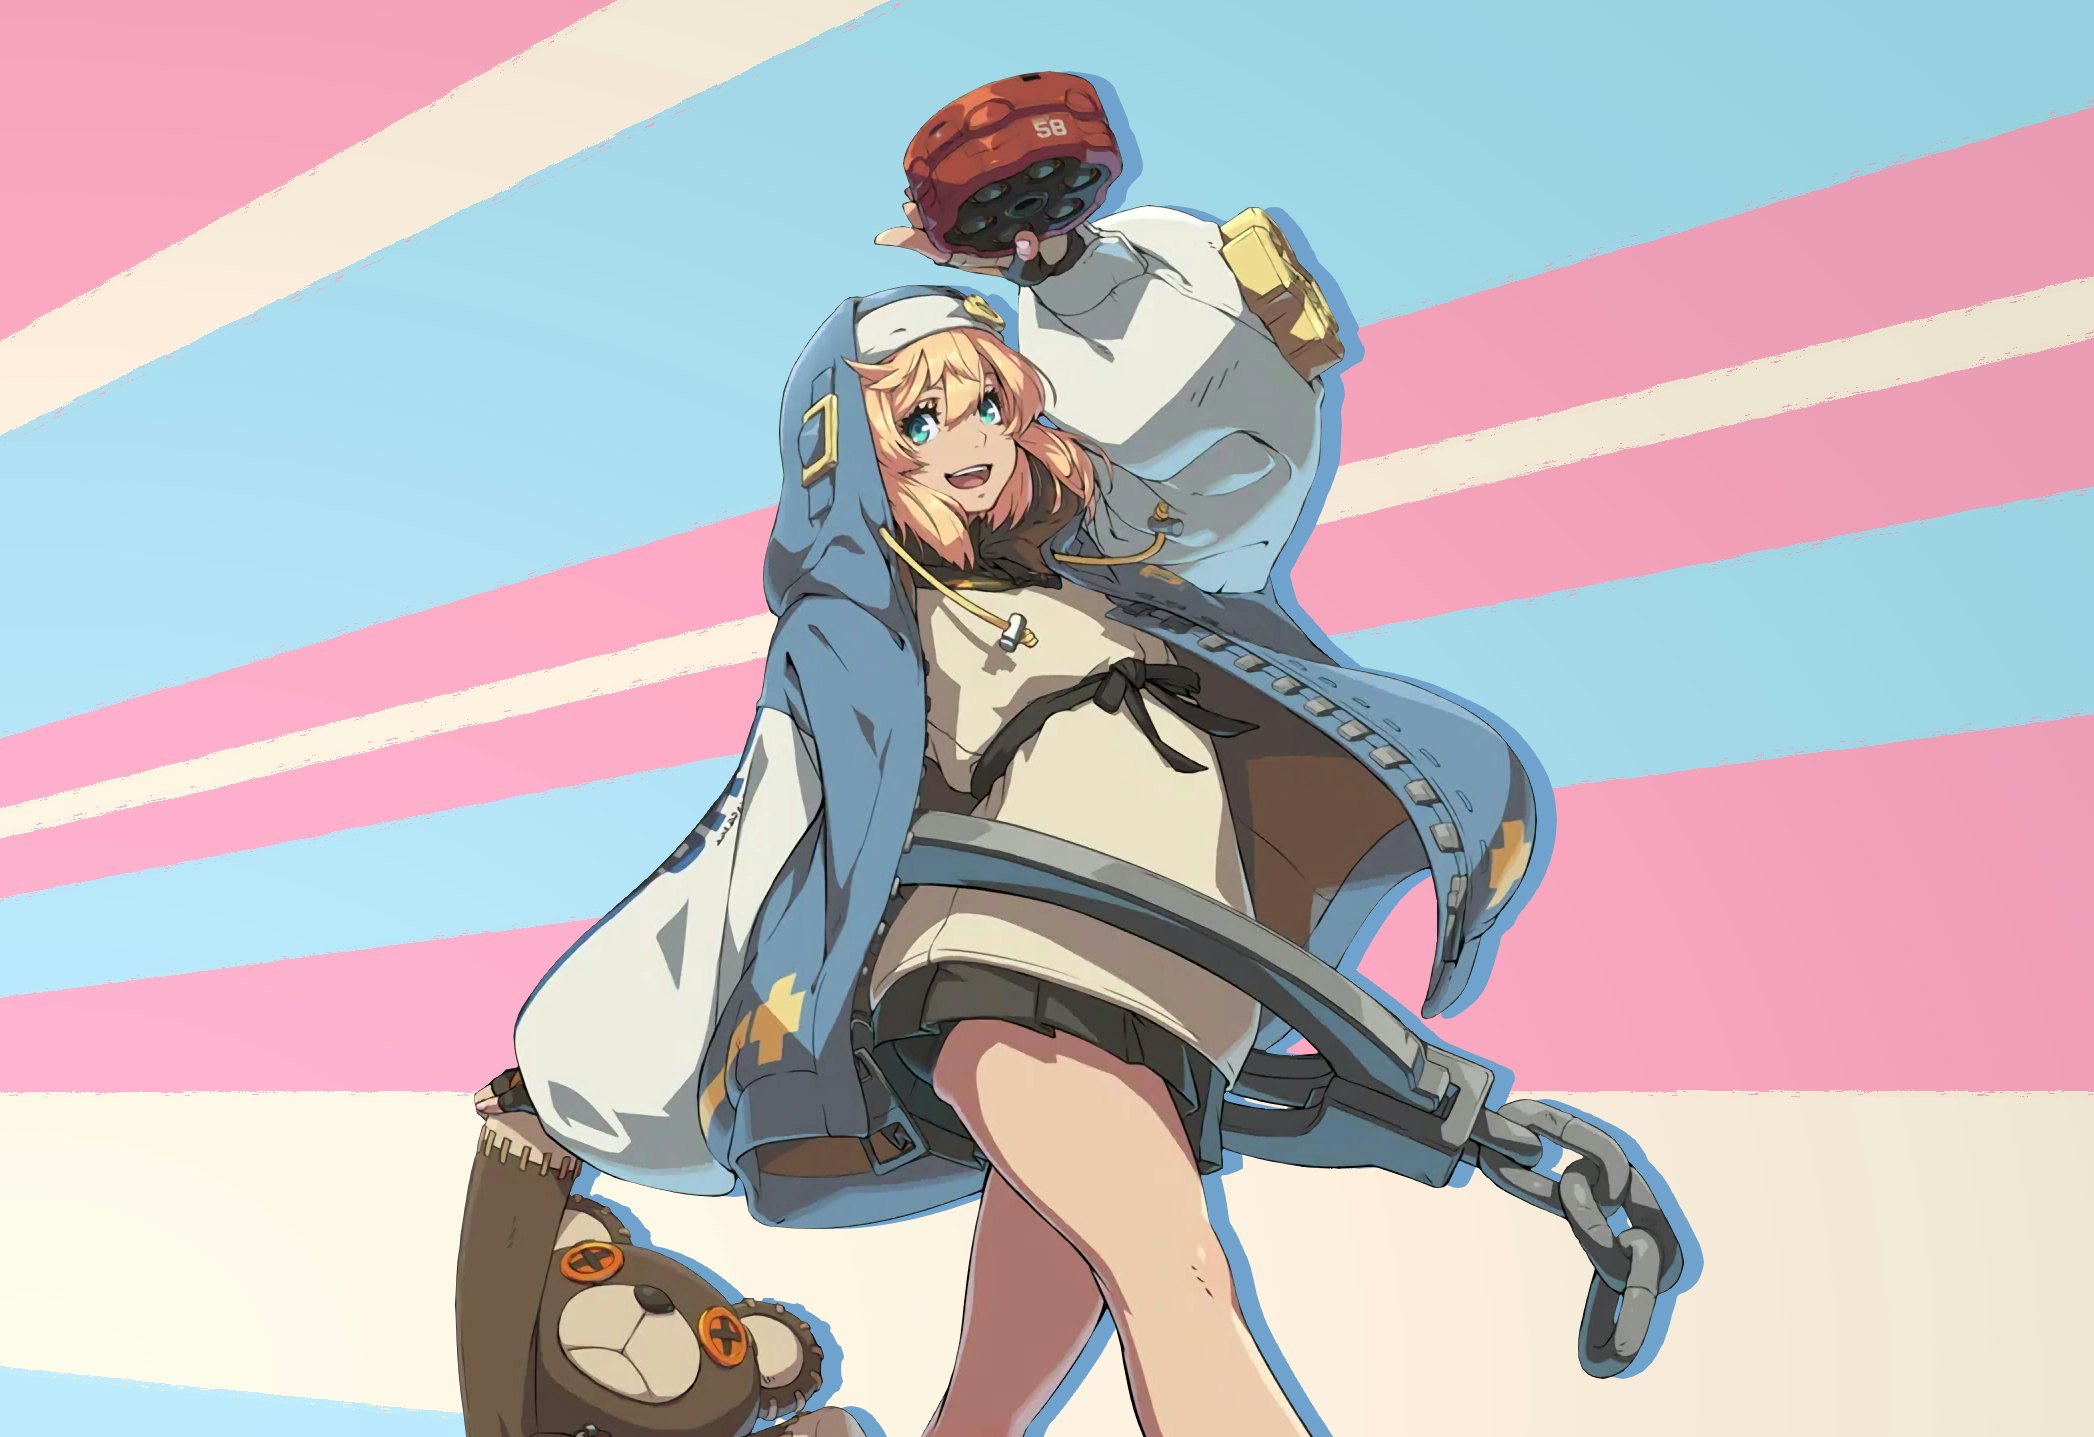 Bridget's Trans Identity In Guilty Gear Finally Leaves Behind The